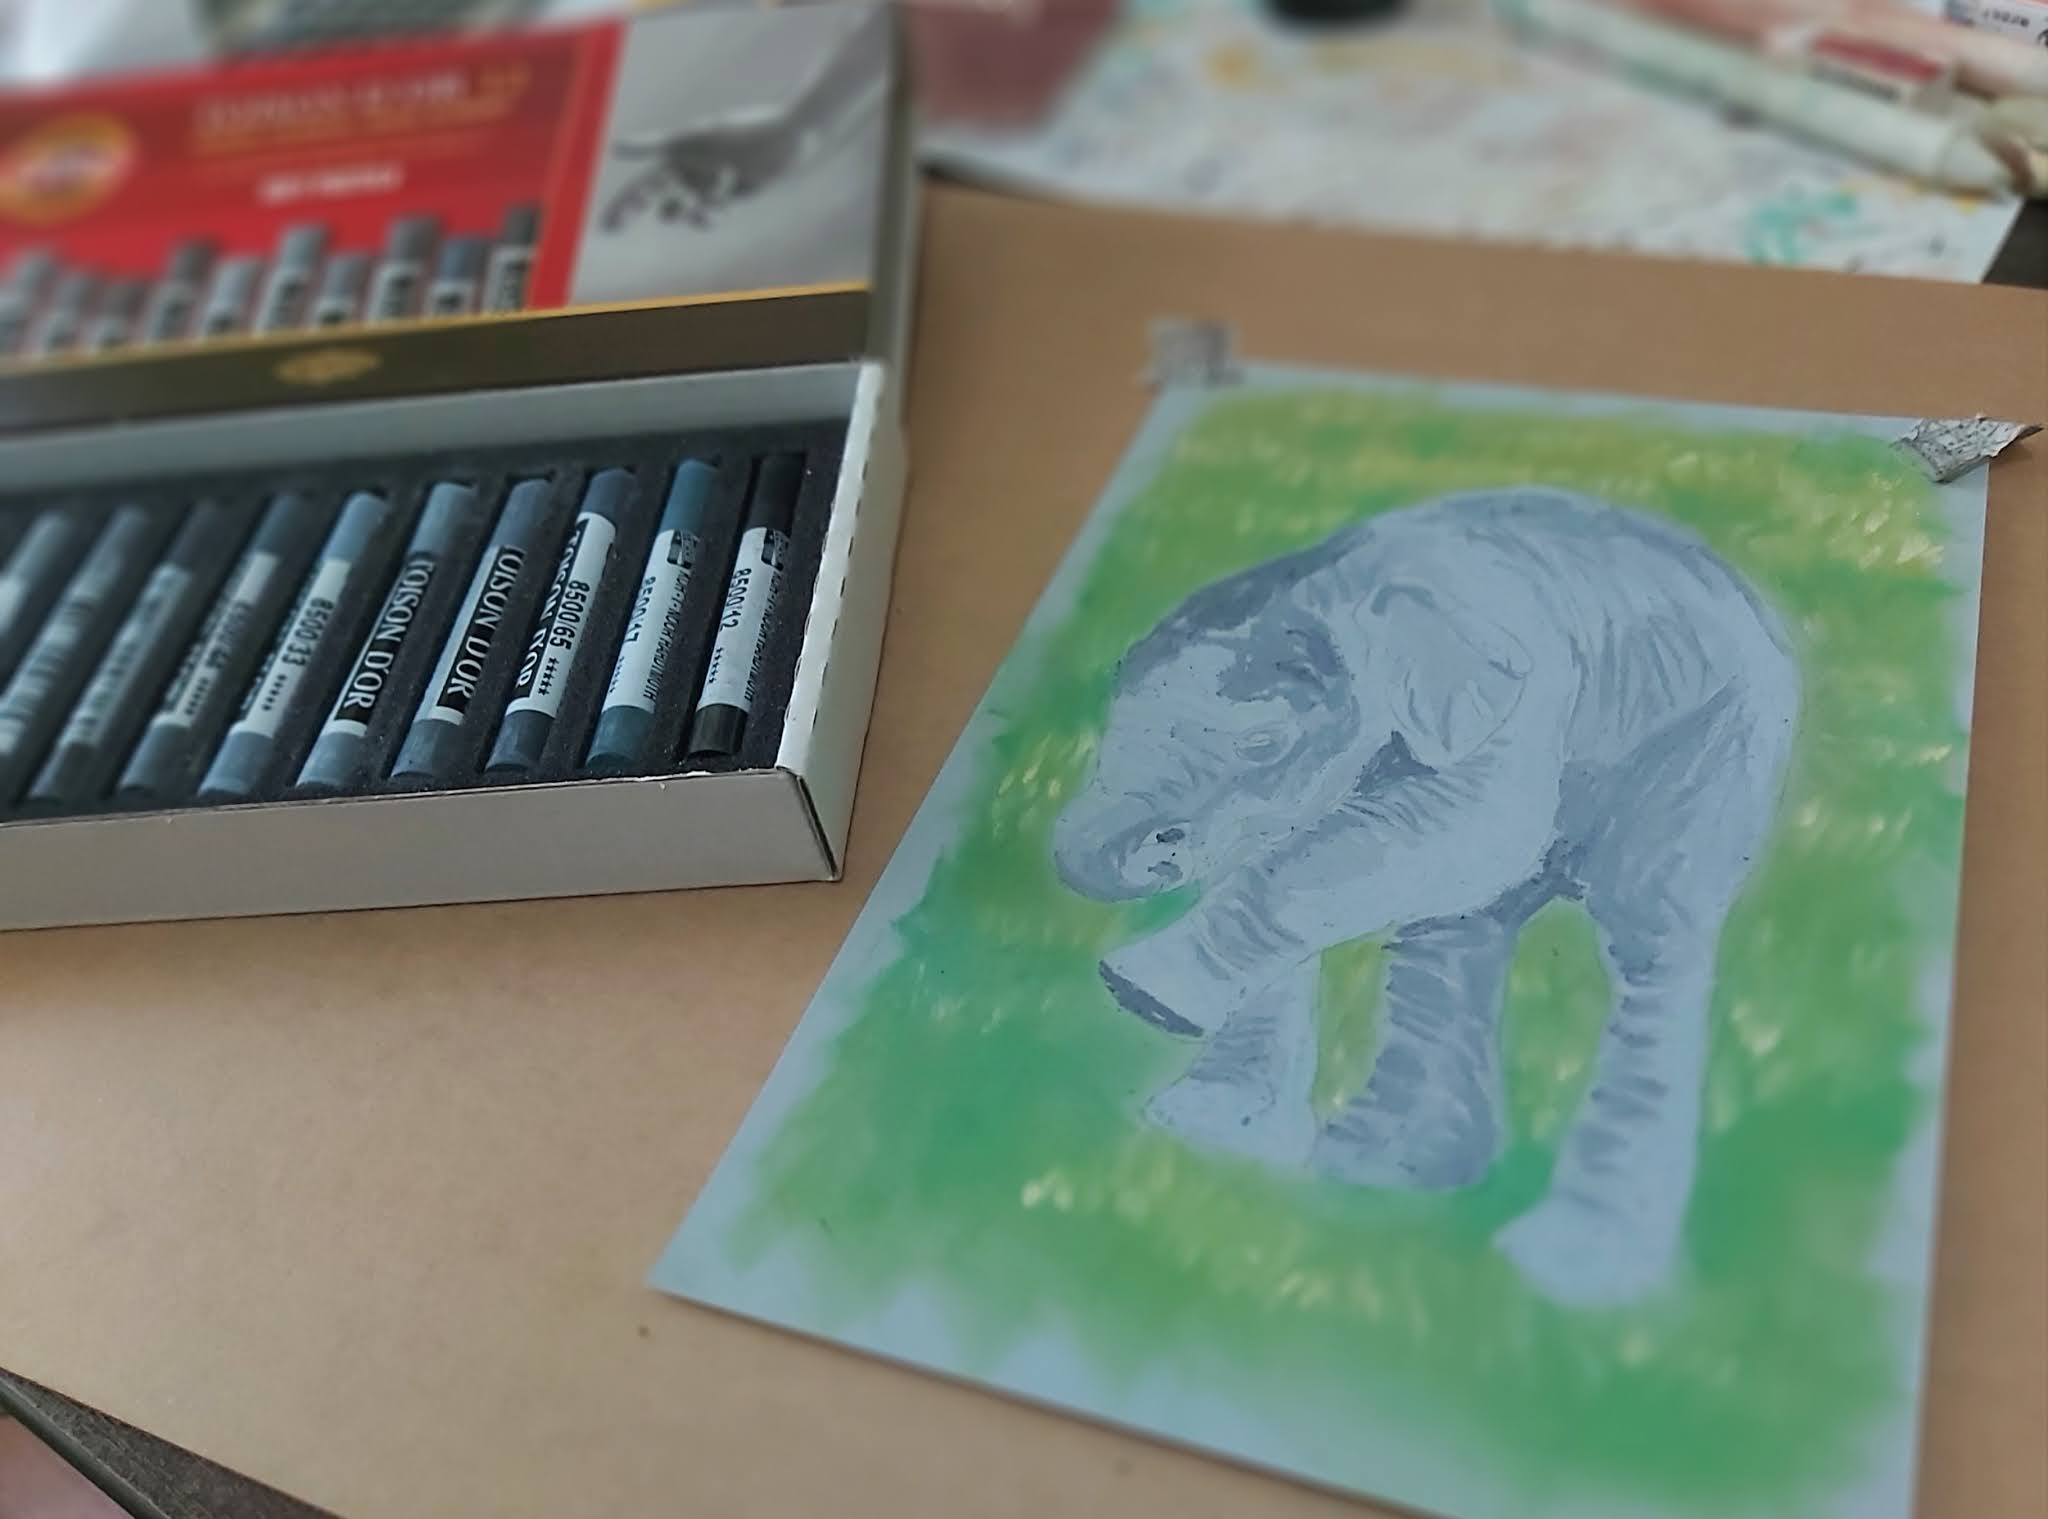 Oil pastels vs soft pastels, and a review of Mungyo Gallery Artists' Soft  Oil Pastels